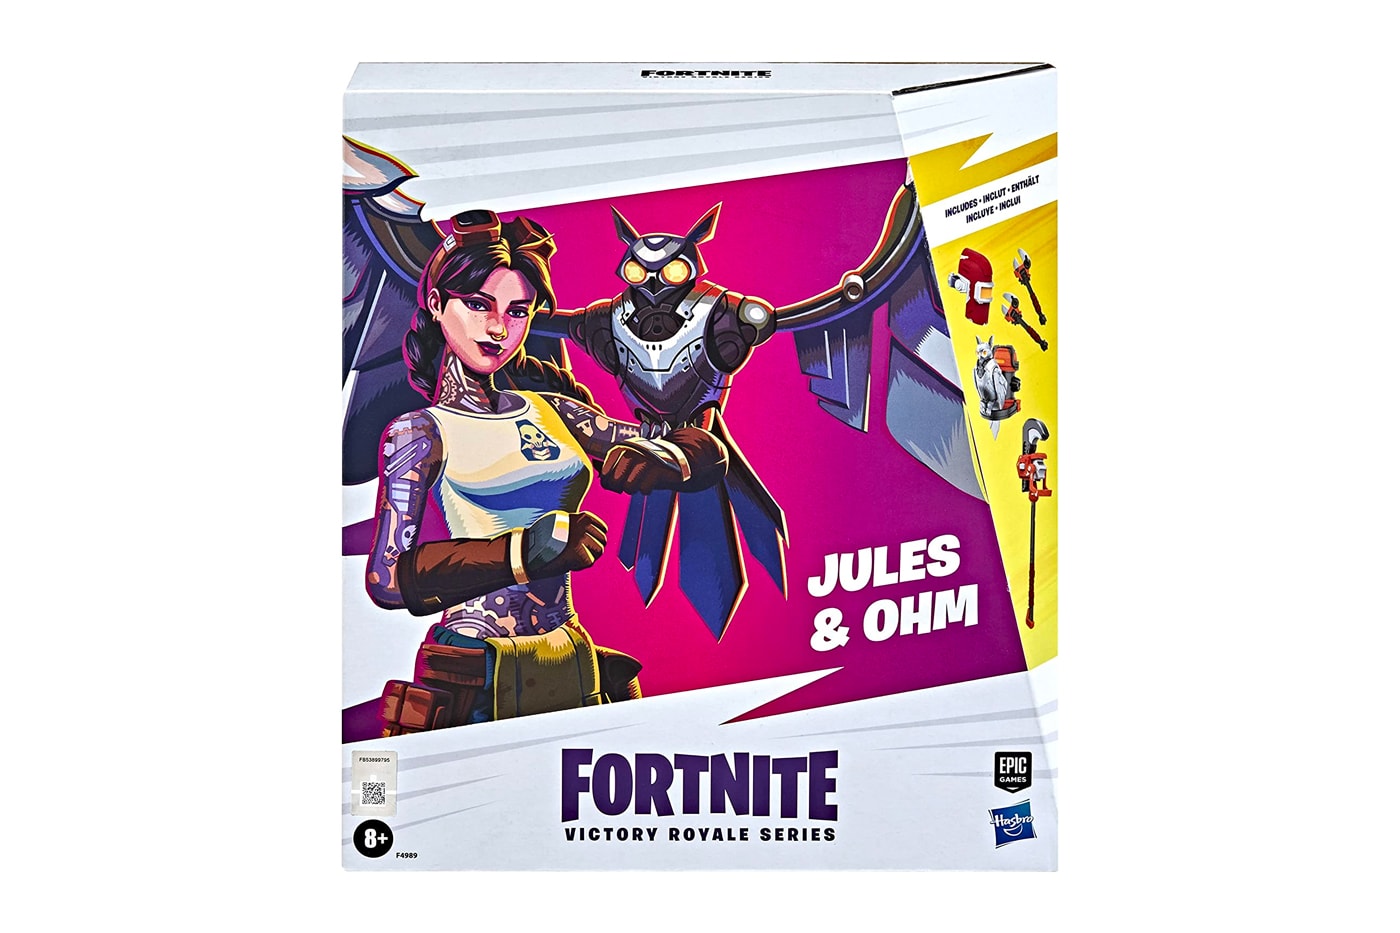 hasbro fortnite victory royale series jules ohm pre order games epic toys action figures amazon 